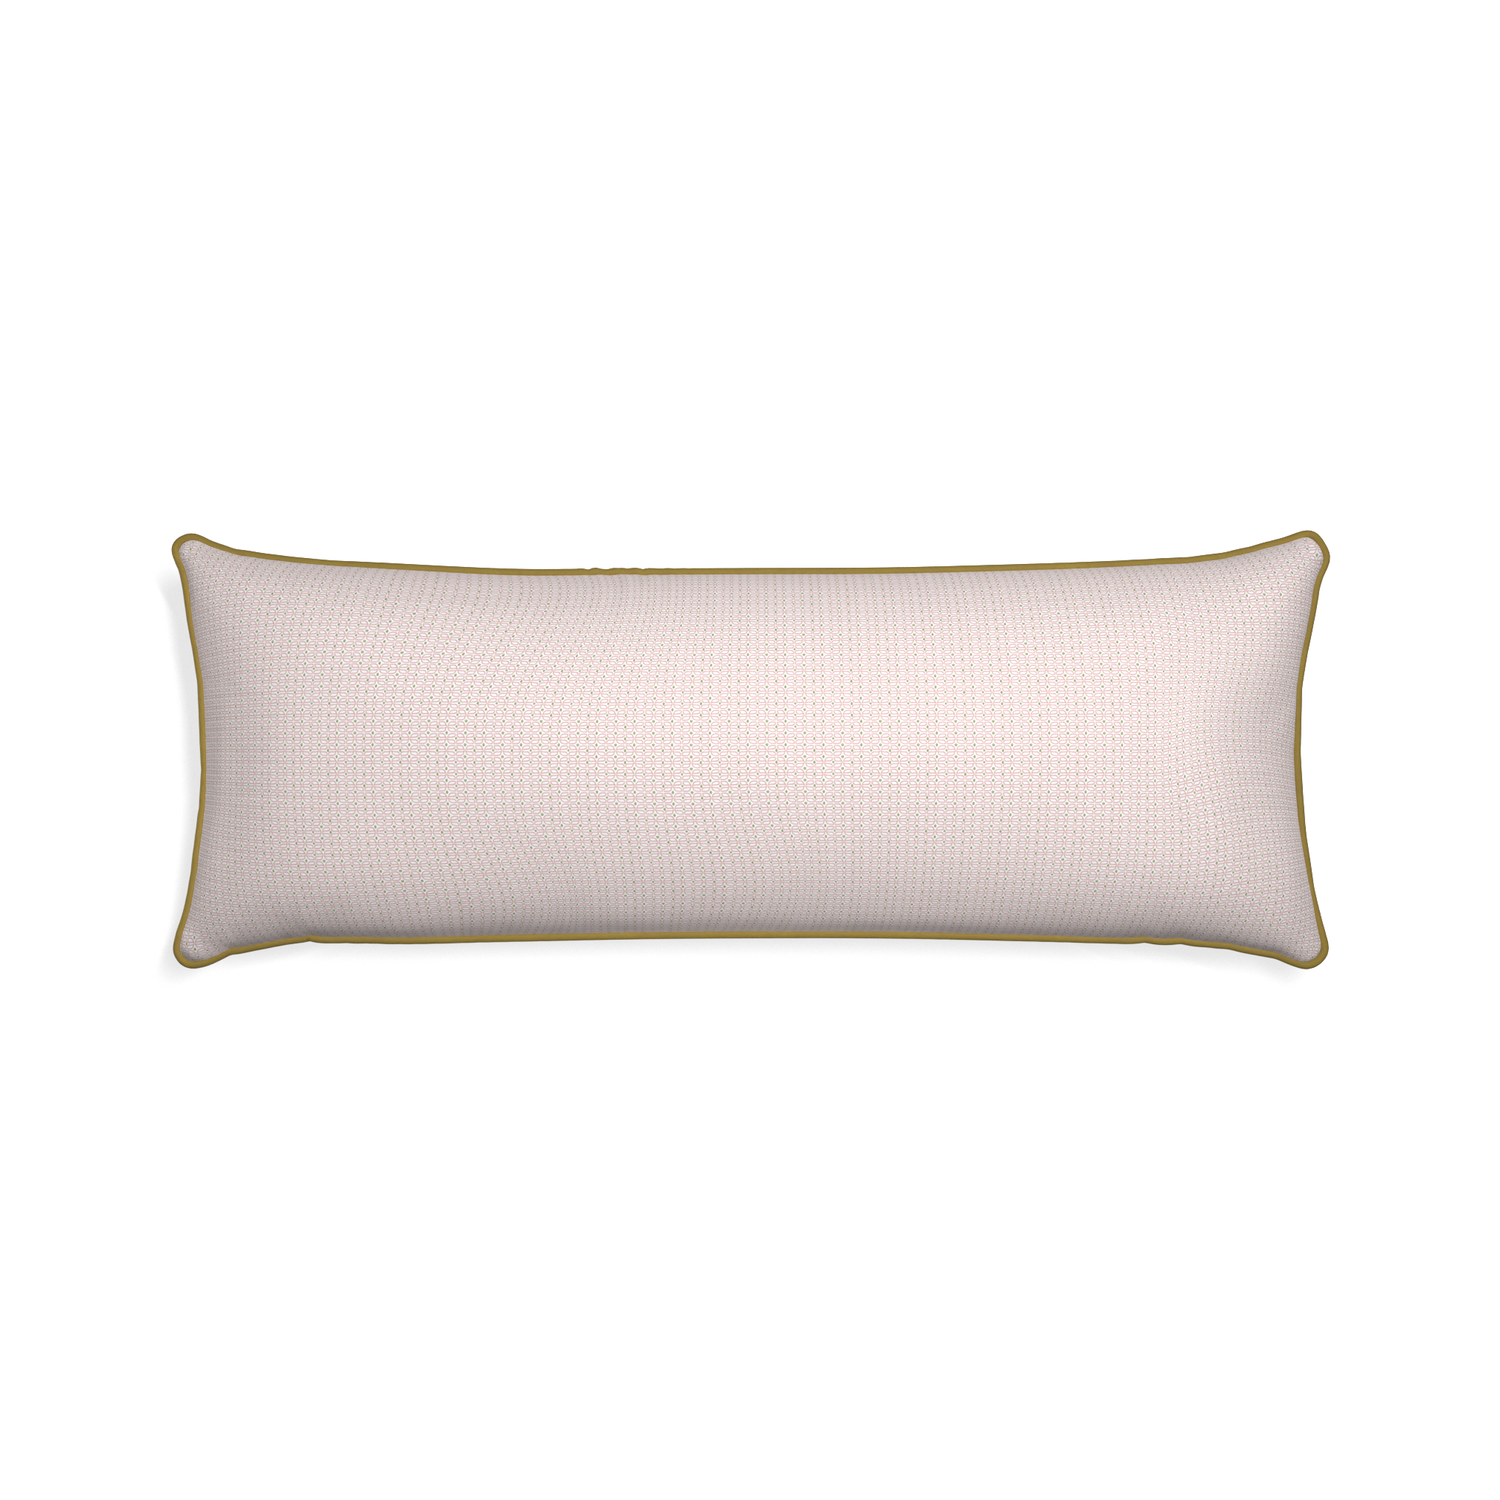 Xl-lumbar loomi pink custom pink geometricpillow with c piping on white background